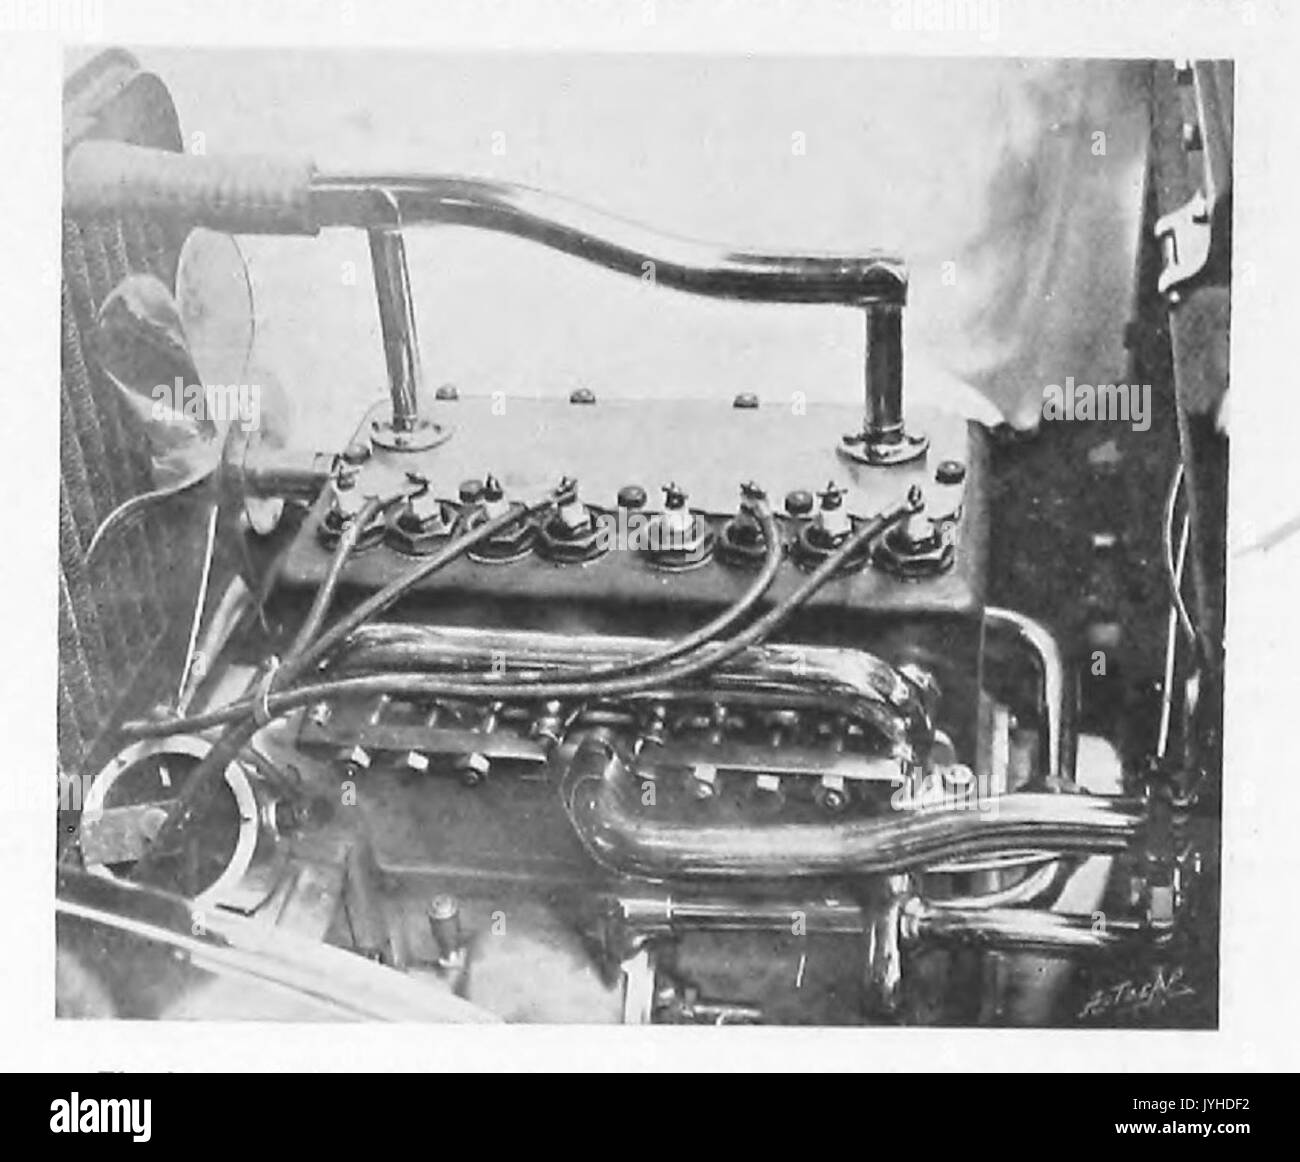 1905 Rover 10 12hp 4 cylinder engine Stock Photo